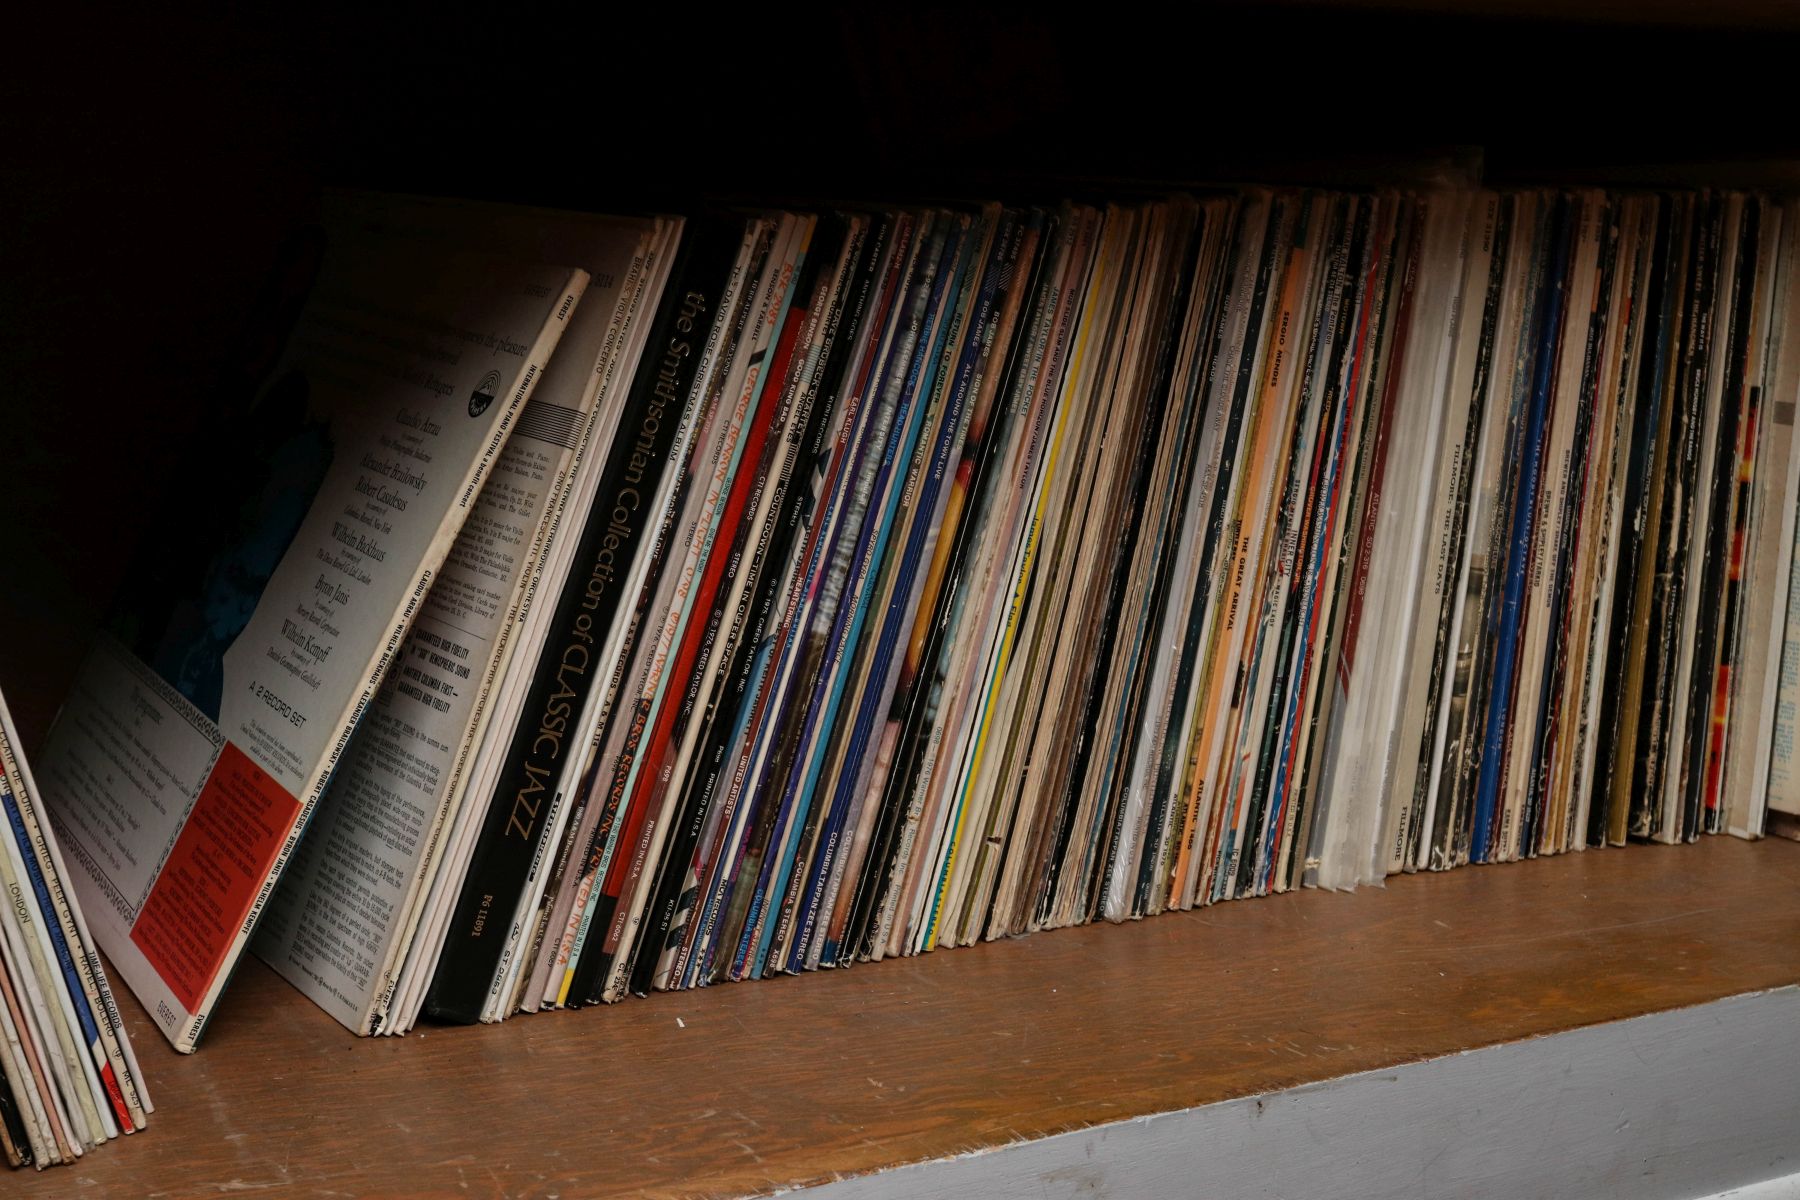 A COLLECTION OF 33 1/3 LP RECORD ALBUMS